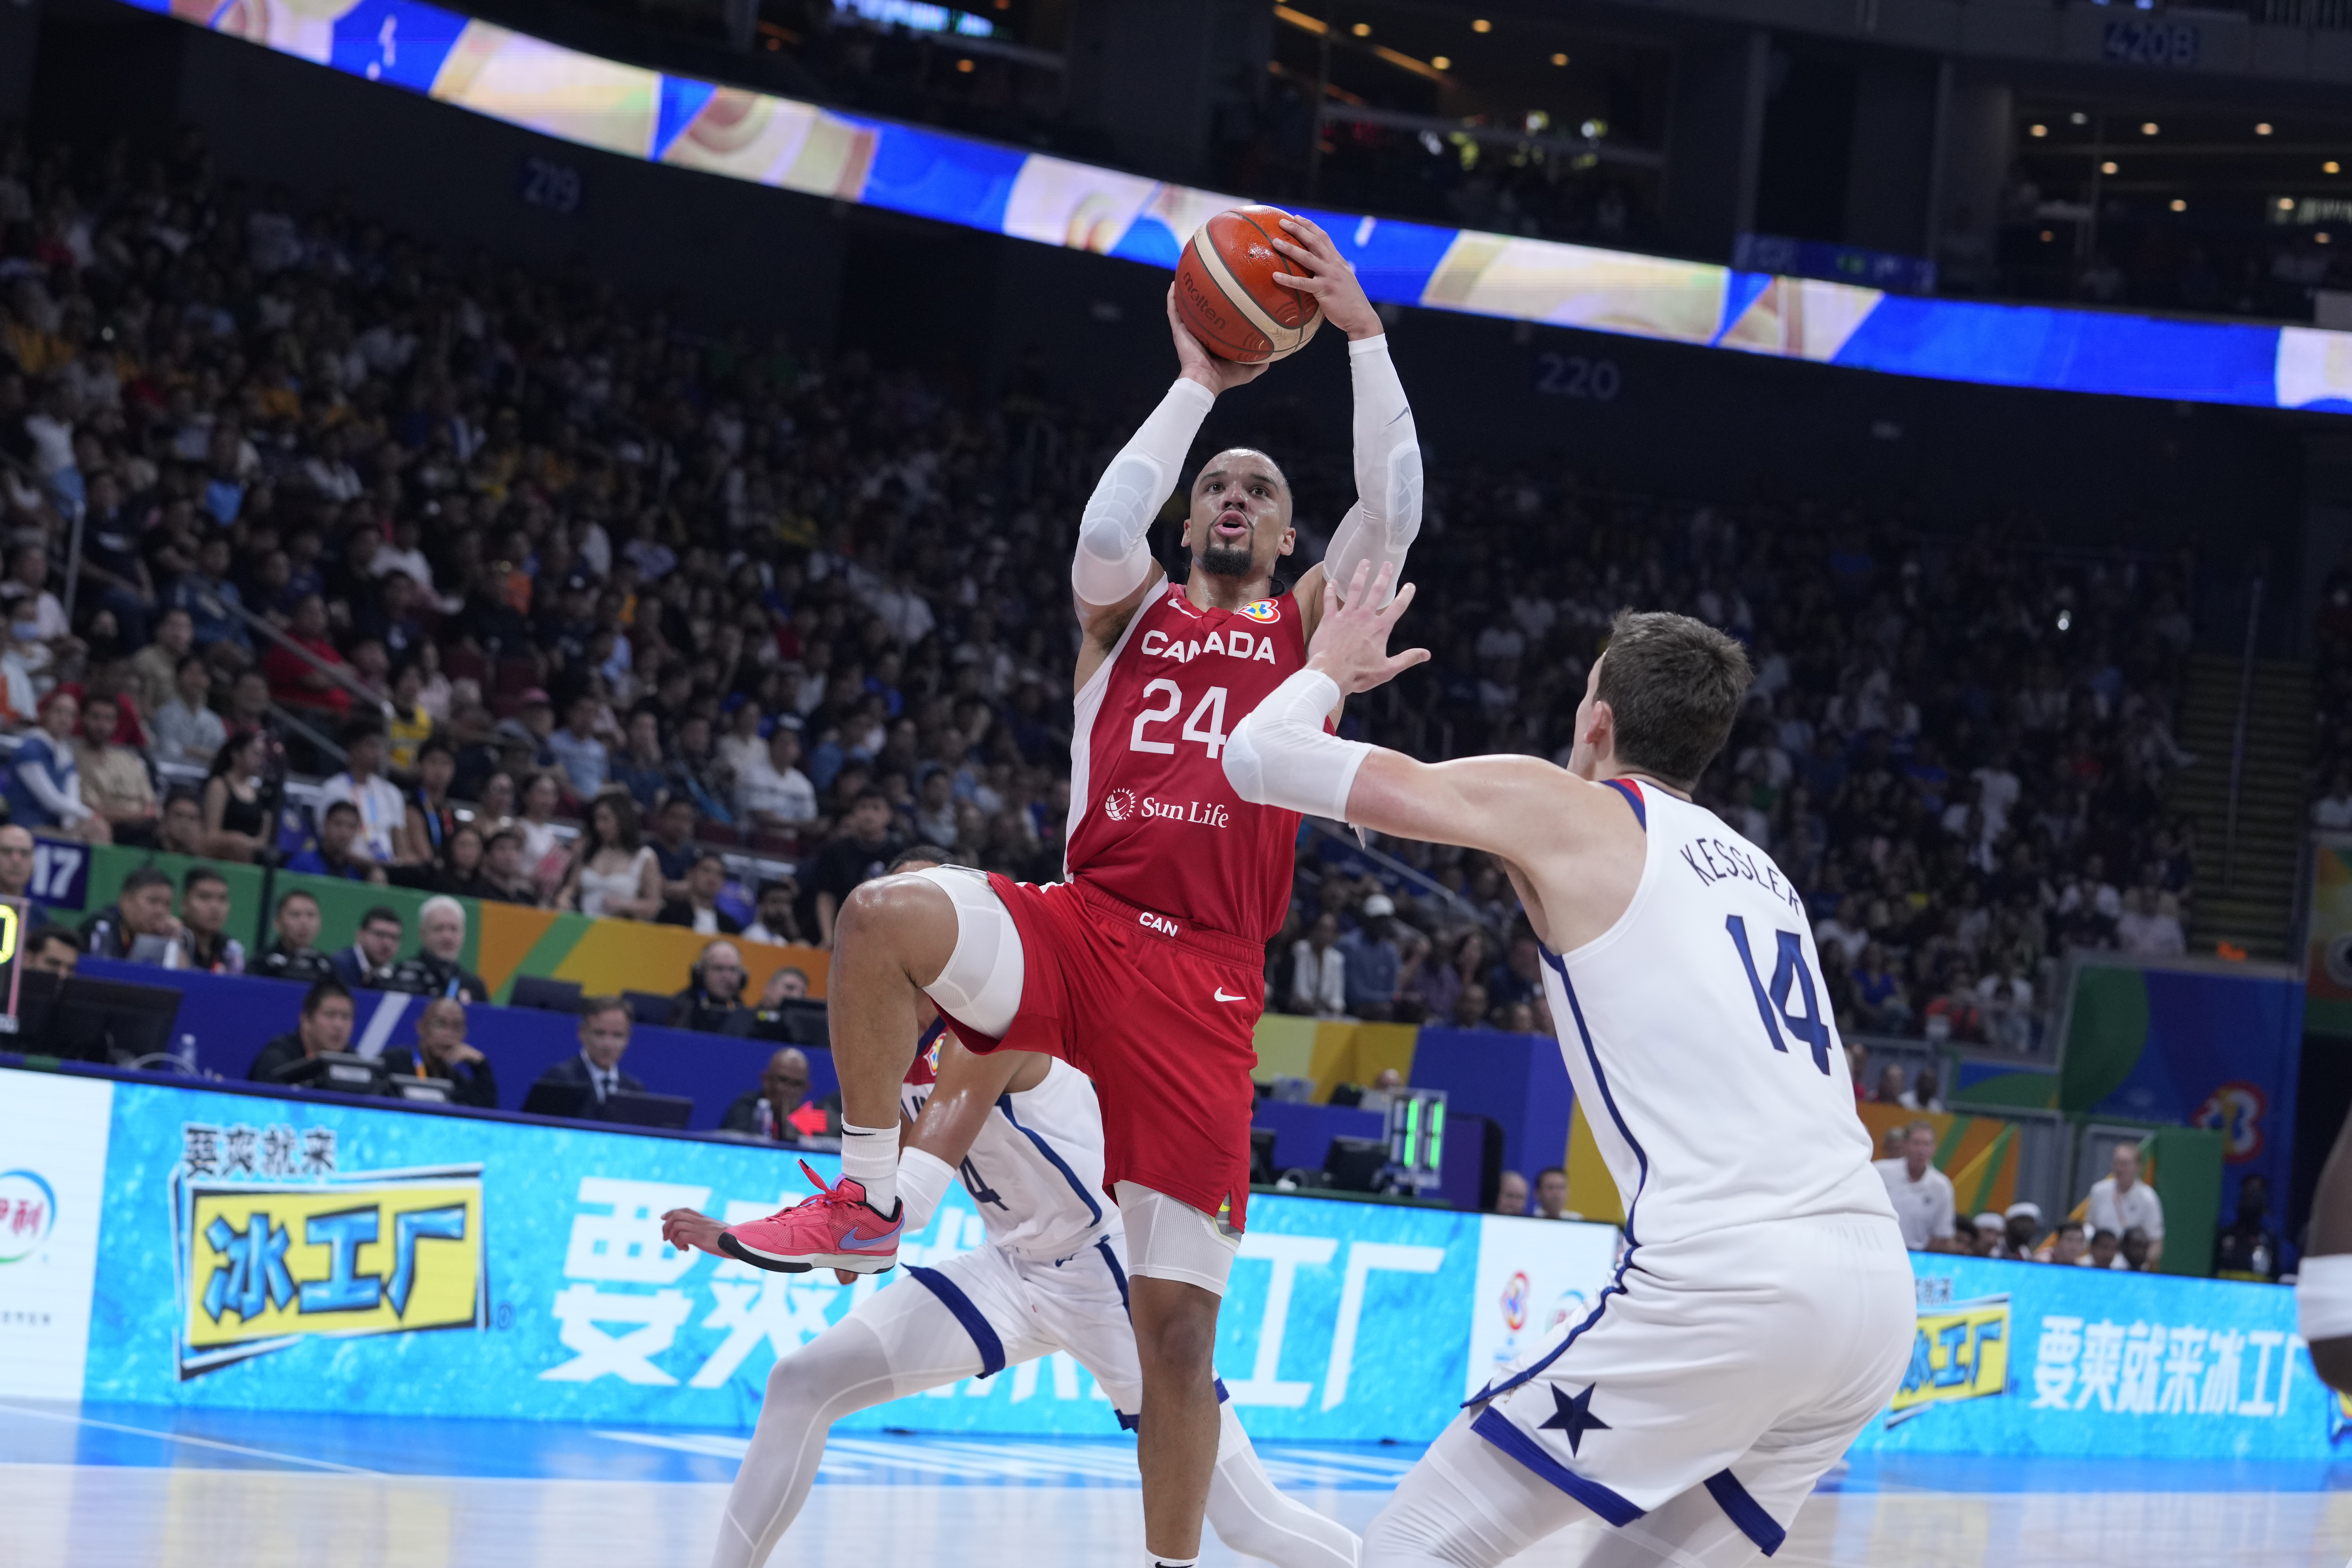 Watch: Dillon Brooks' record-setting performance powers Canada's